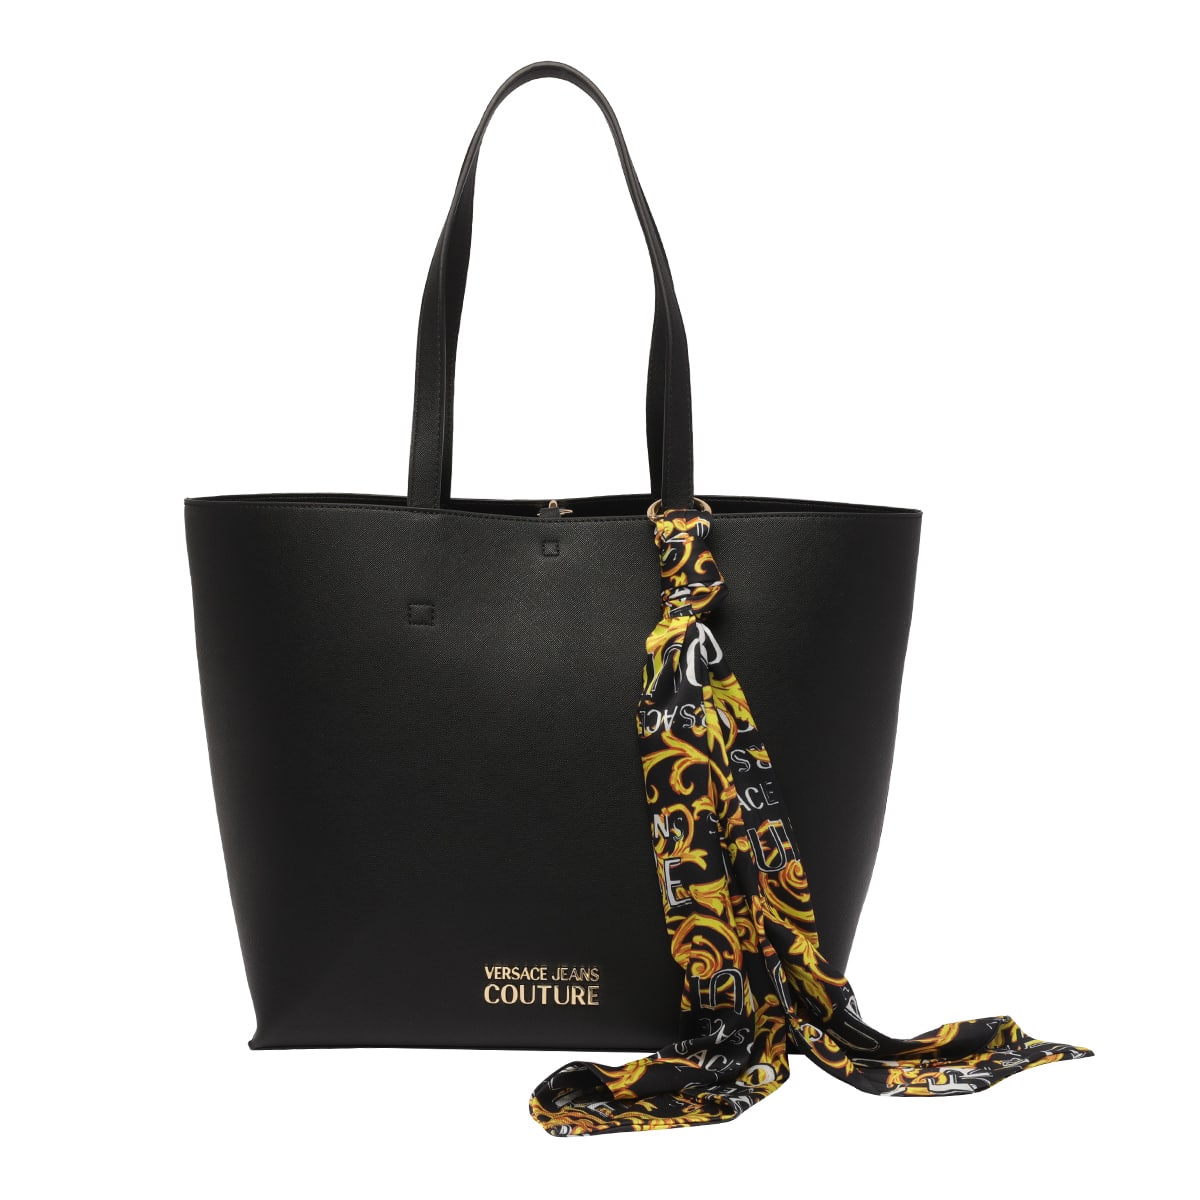 Versace Jeans Couture Thelma Logo Couture Tote Bag